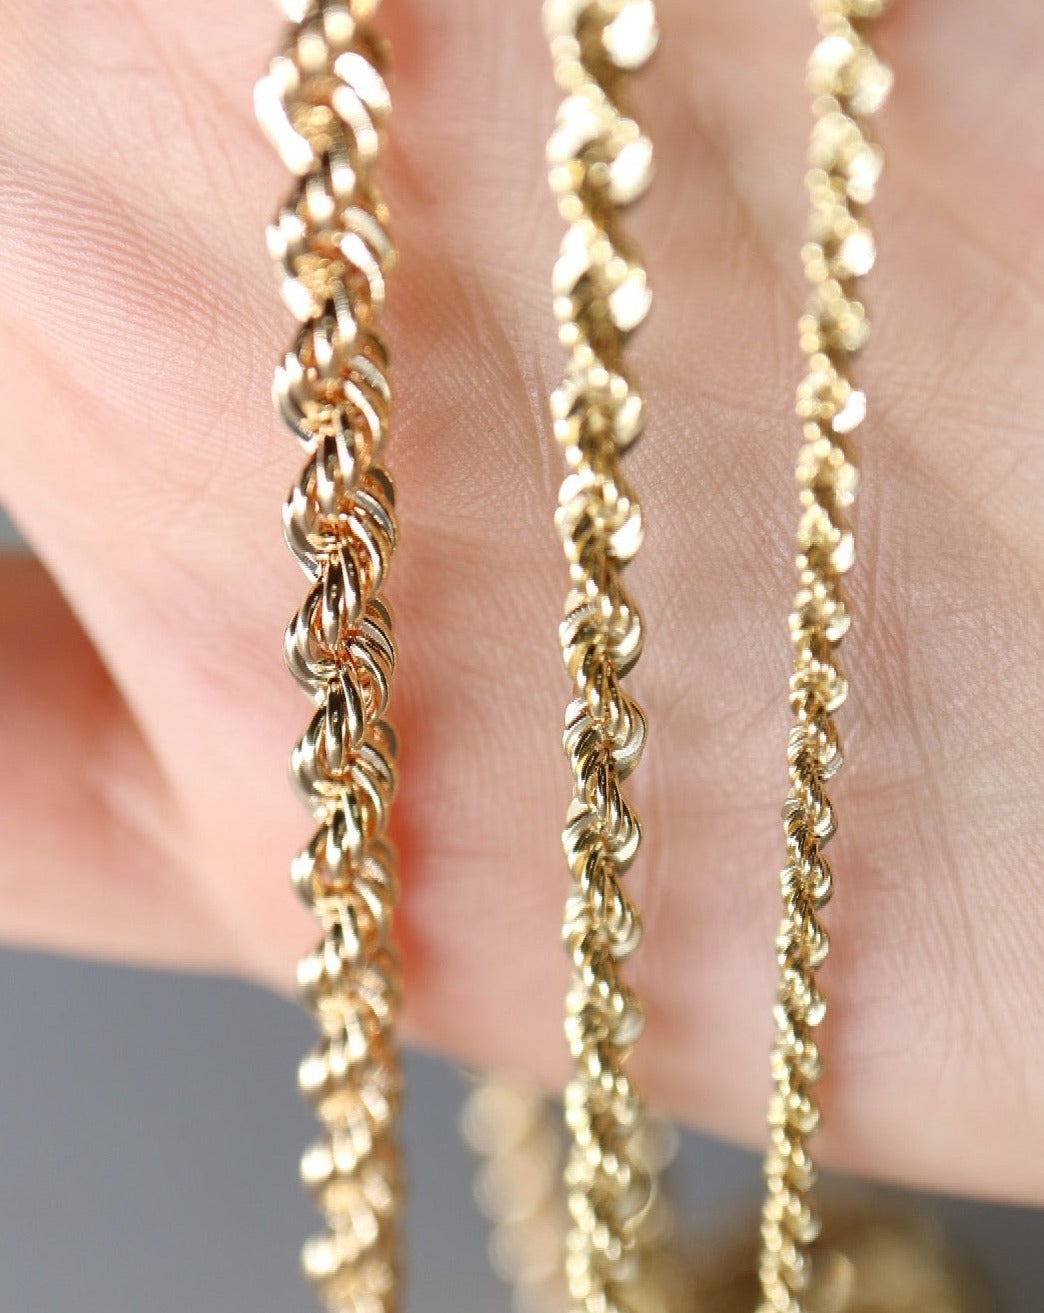 9ct gold Rope Chains from Collective & Co Jewellery